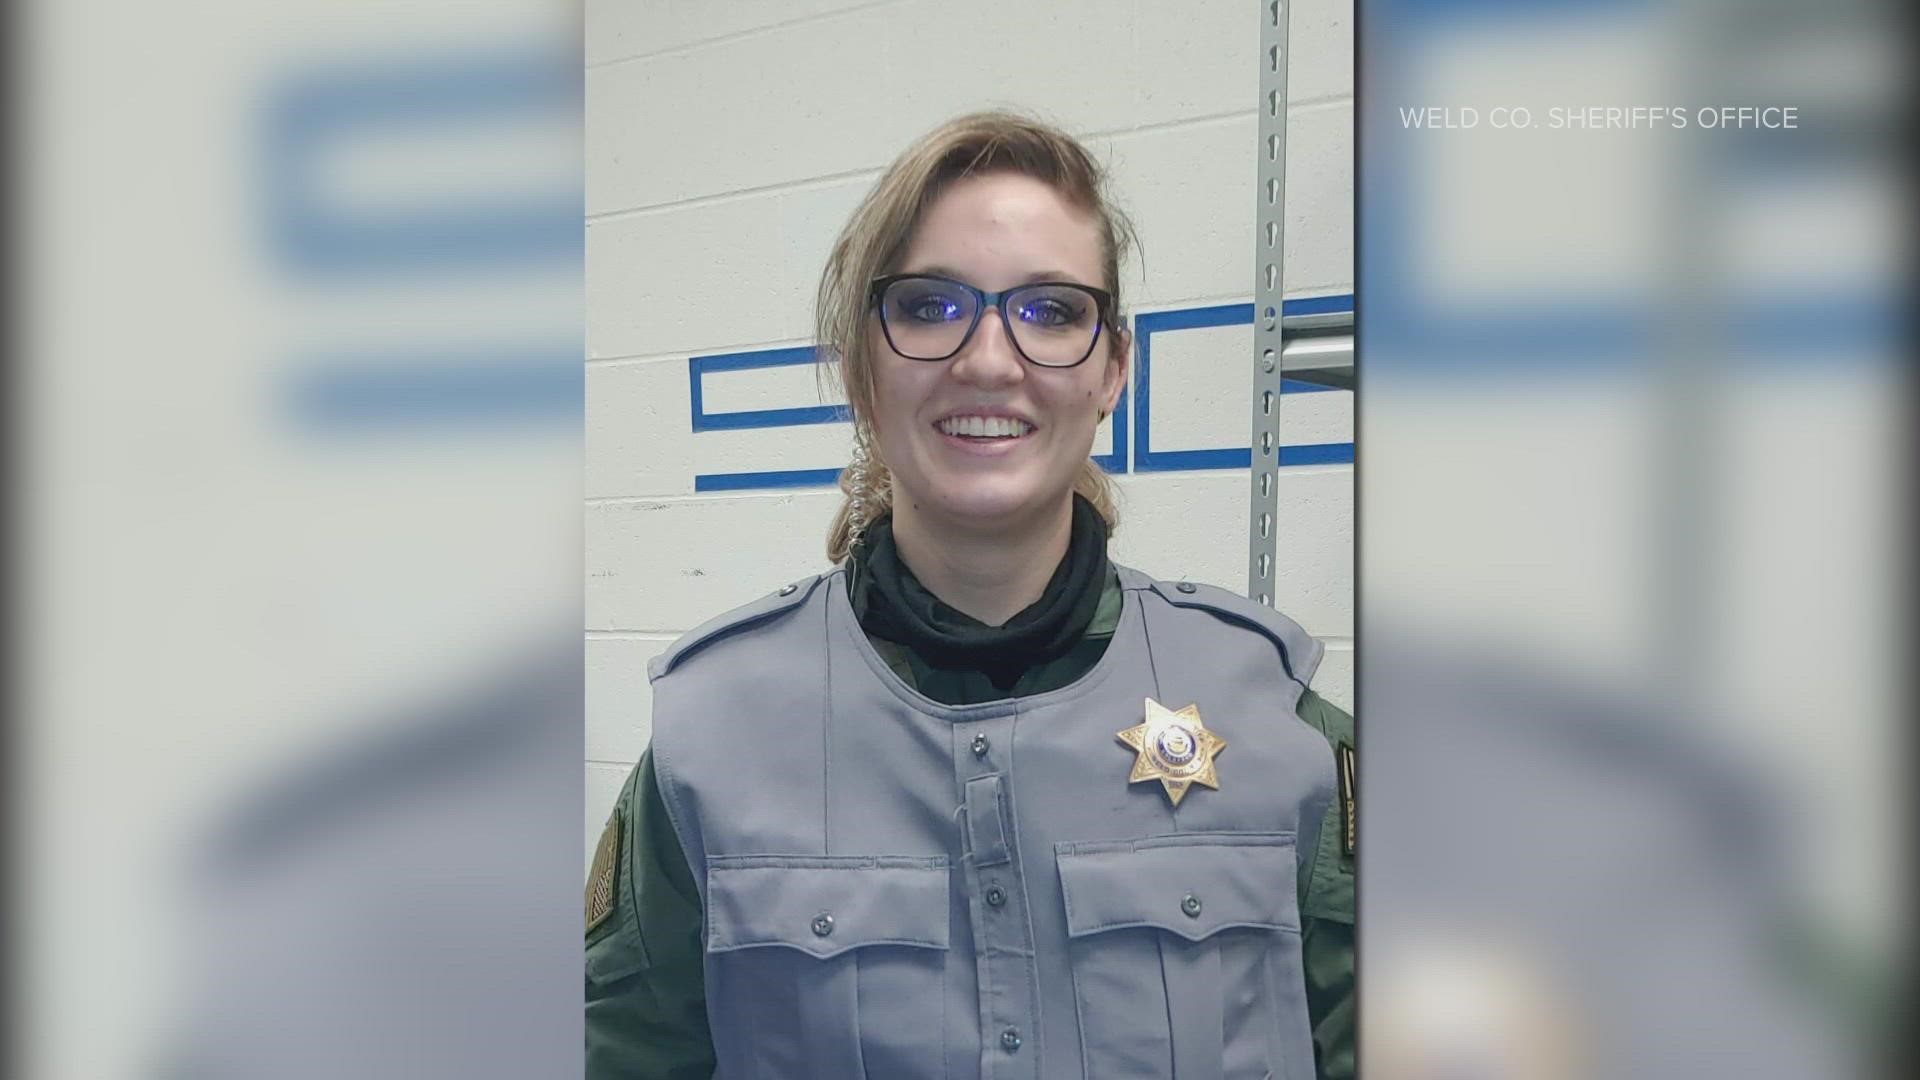 The service itself is private, but the public is invited to pay their respects along a procession route to honor Weld County Deputy Alexis Hein-Nutz.